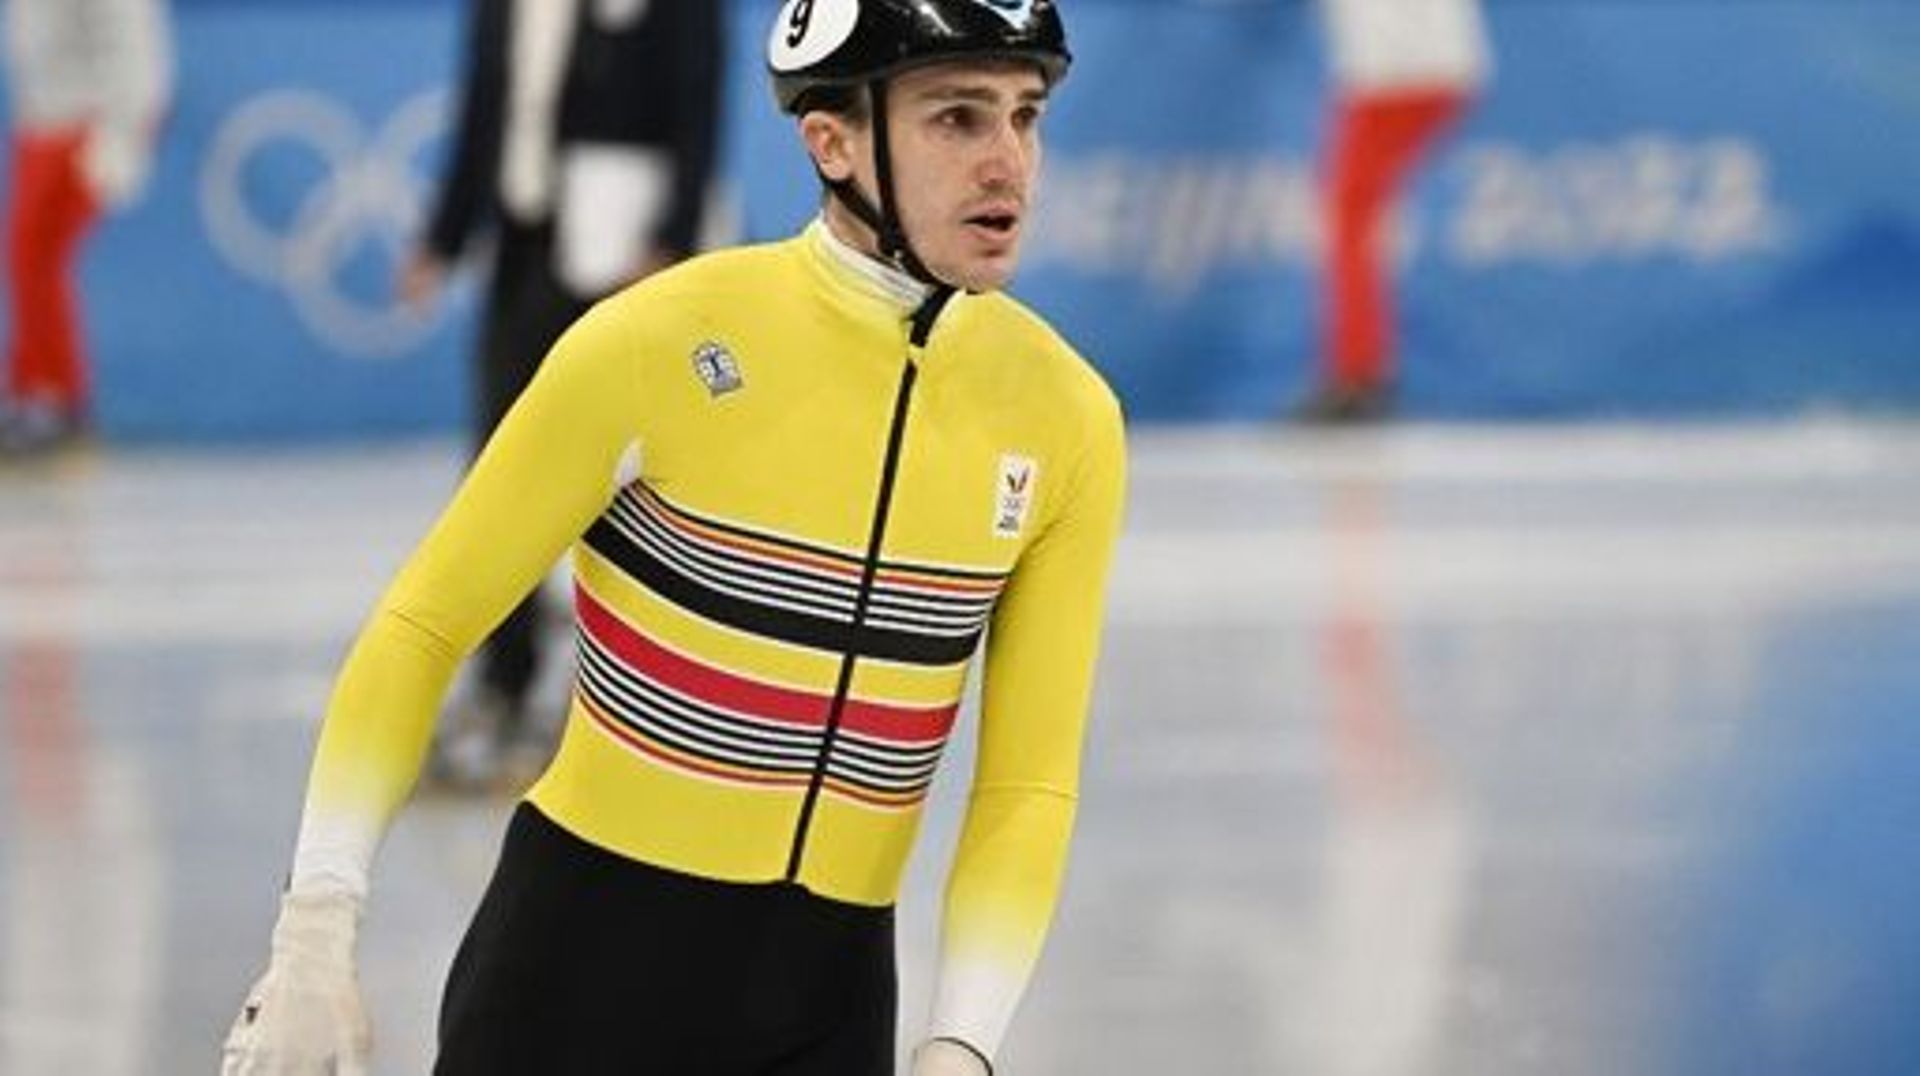 Belgian Stijn Desmet pictured after the quarterfinals of the men’s 500m Short Track speed skating event at the Beijing 2022 Winter Olympics in Beijing, China, Sunday 13 February 2022. The winter Olympics are taking place from 4 February to 20 February 202